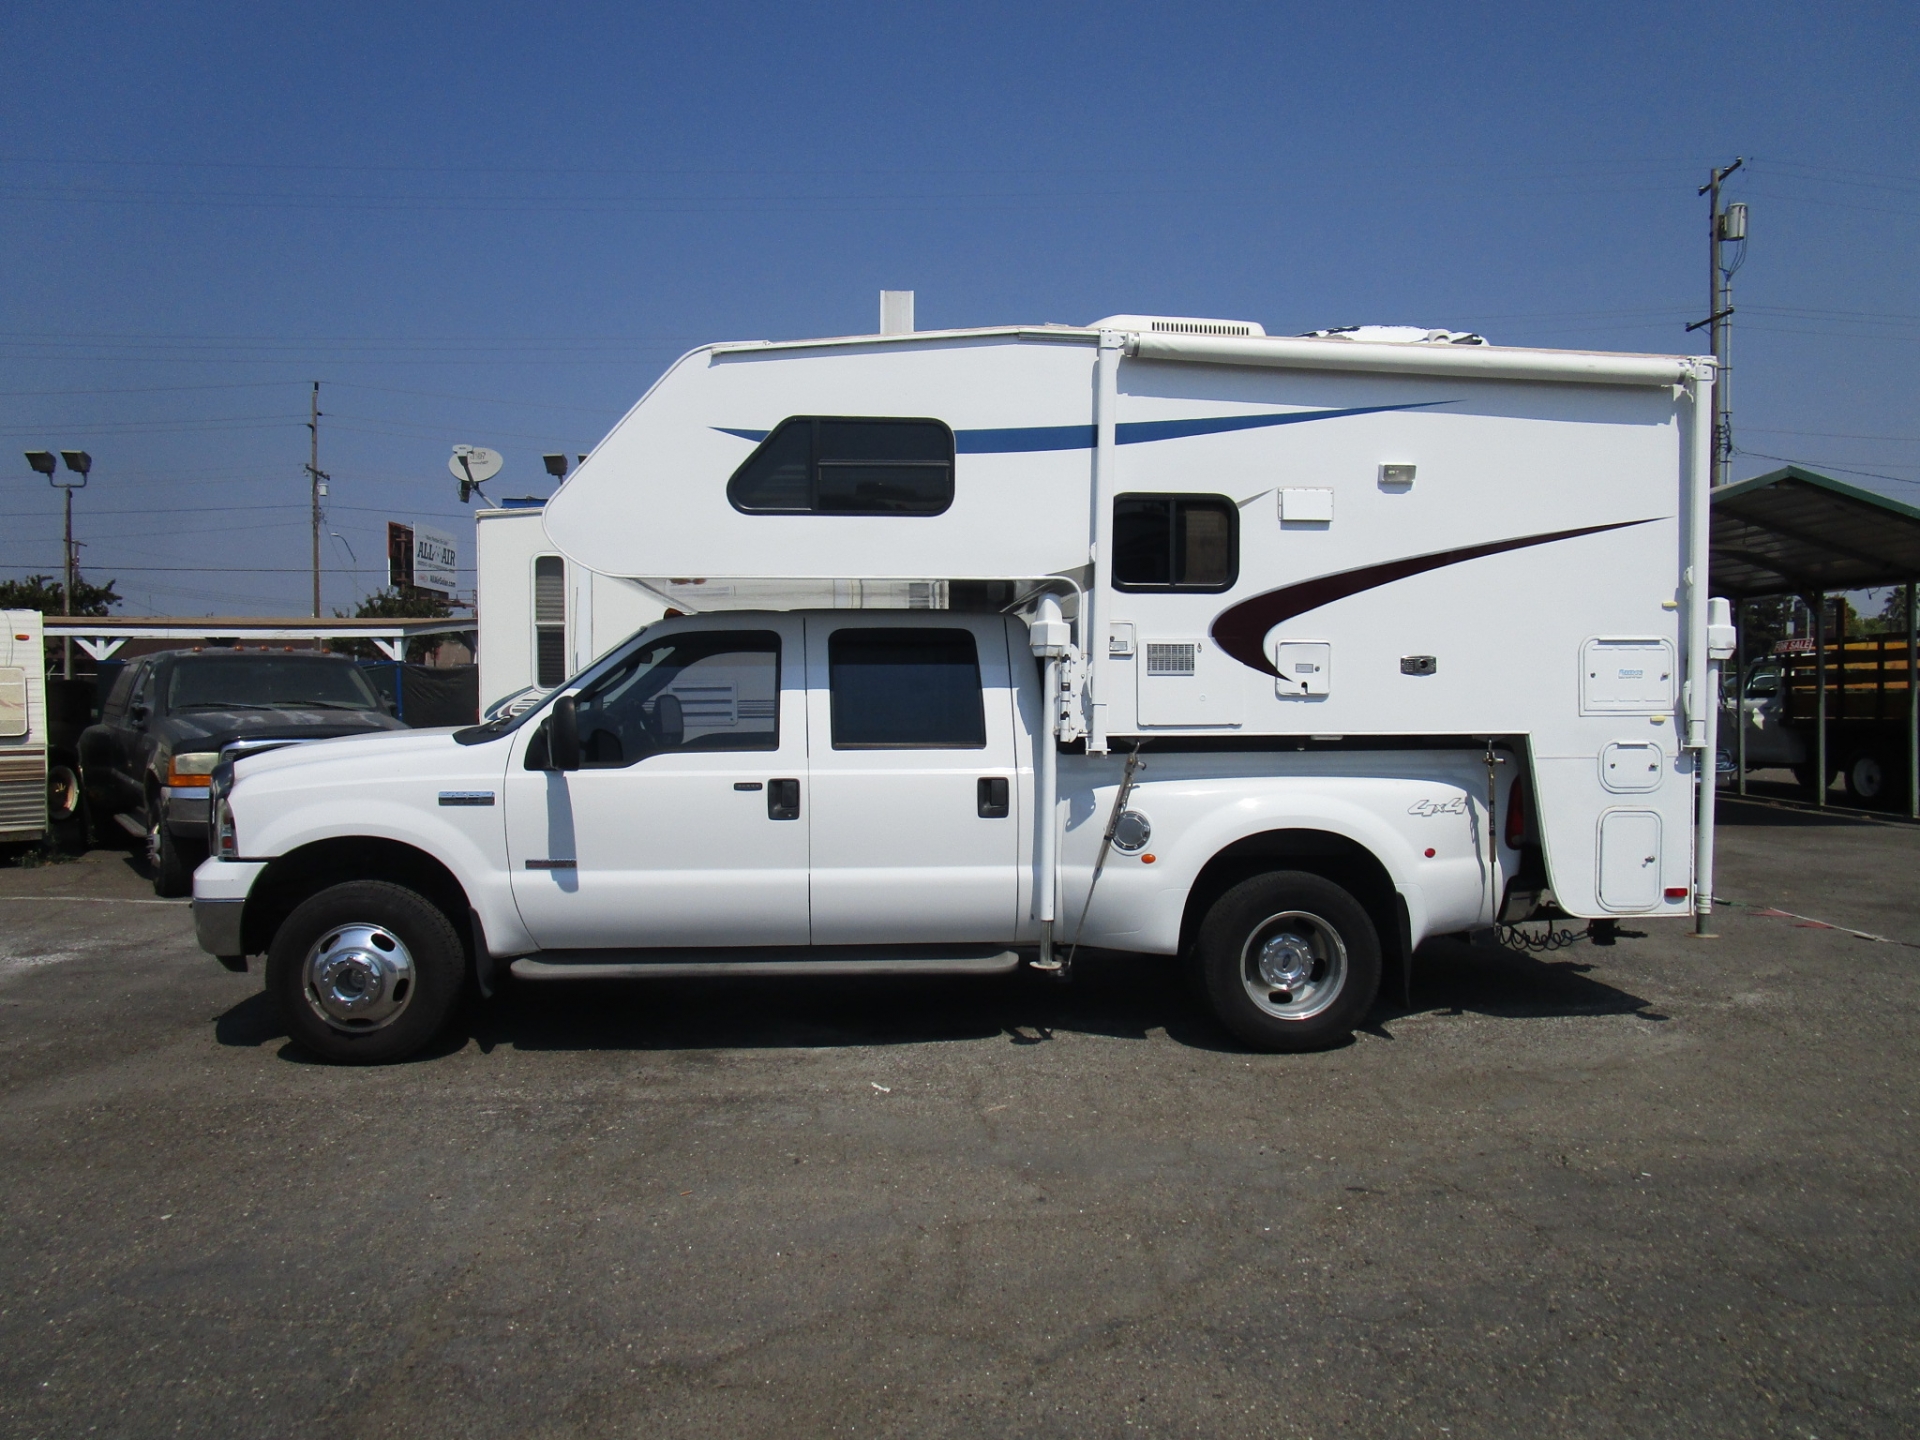 2005 Ford F350 Crew Cab Diesel Dually 4X4 2004 Lance Cab-Over Camper